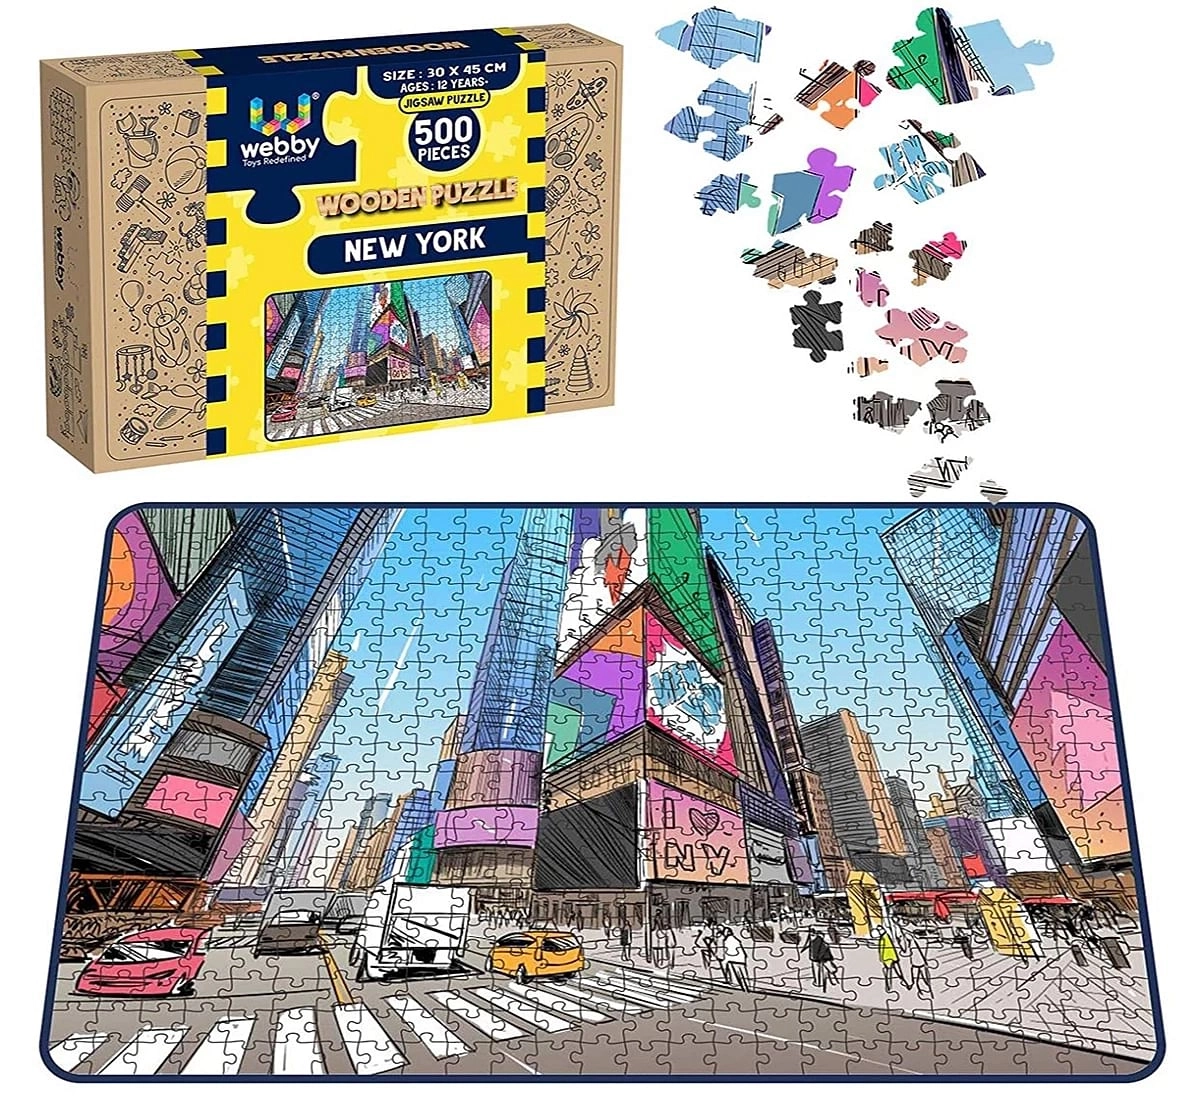 Webby New York 500 Pieces Wooden Puzzle for Kids 7Y+, Multicolour